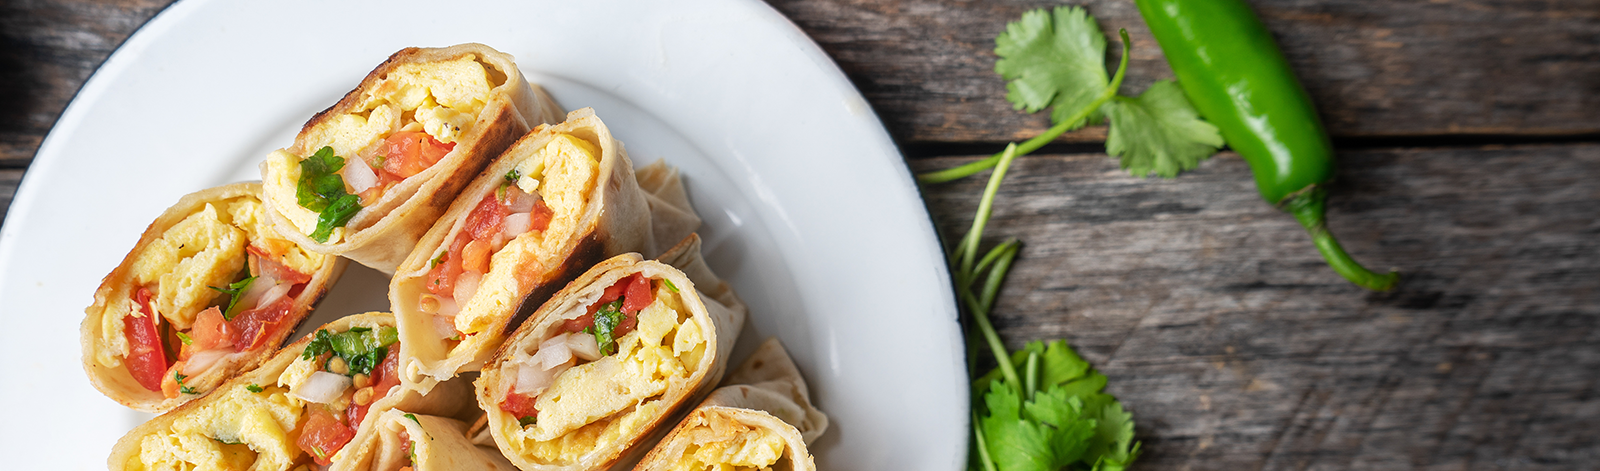 A plate of breakfast burritos on wooden background